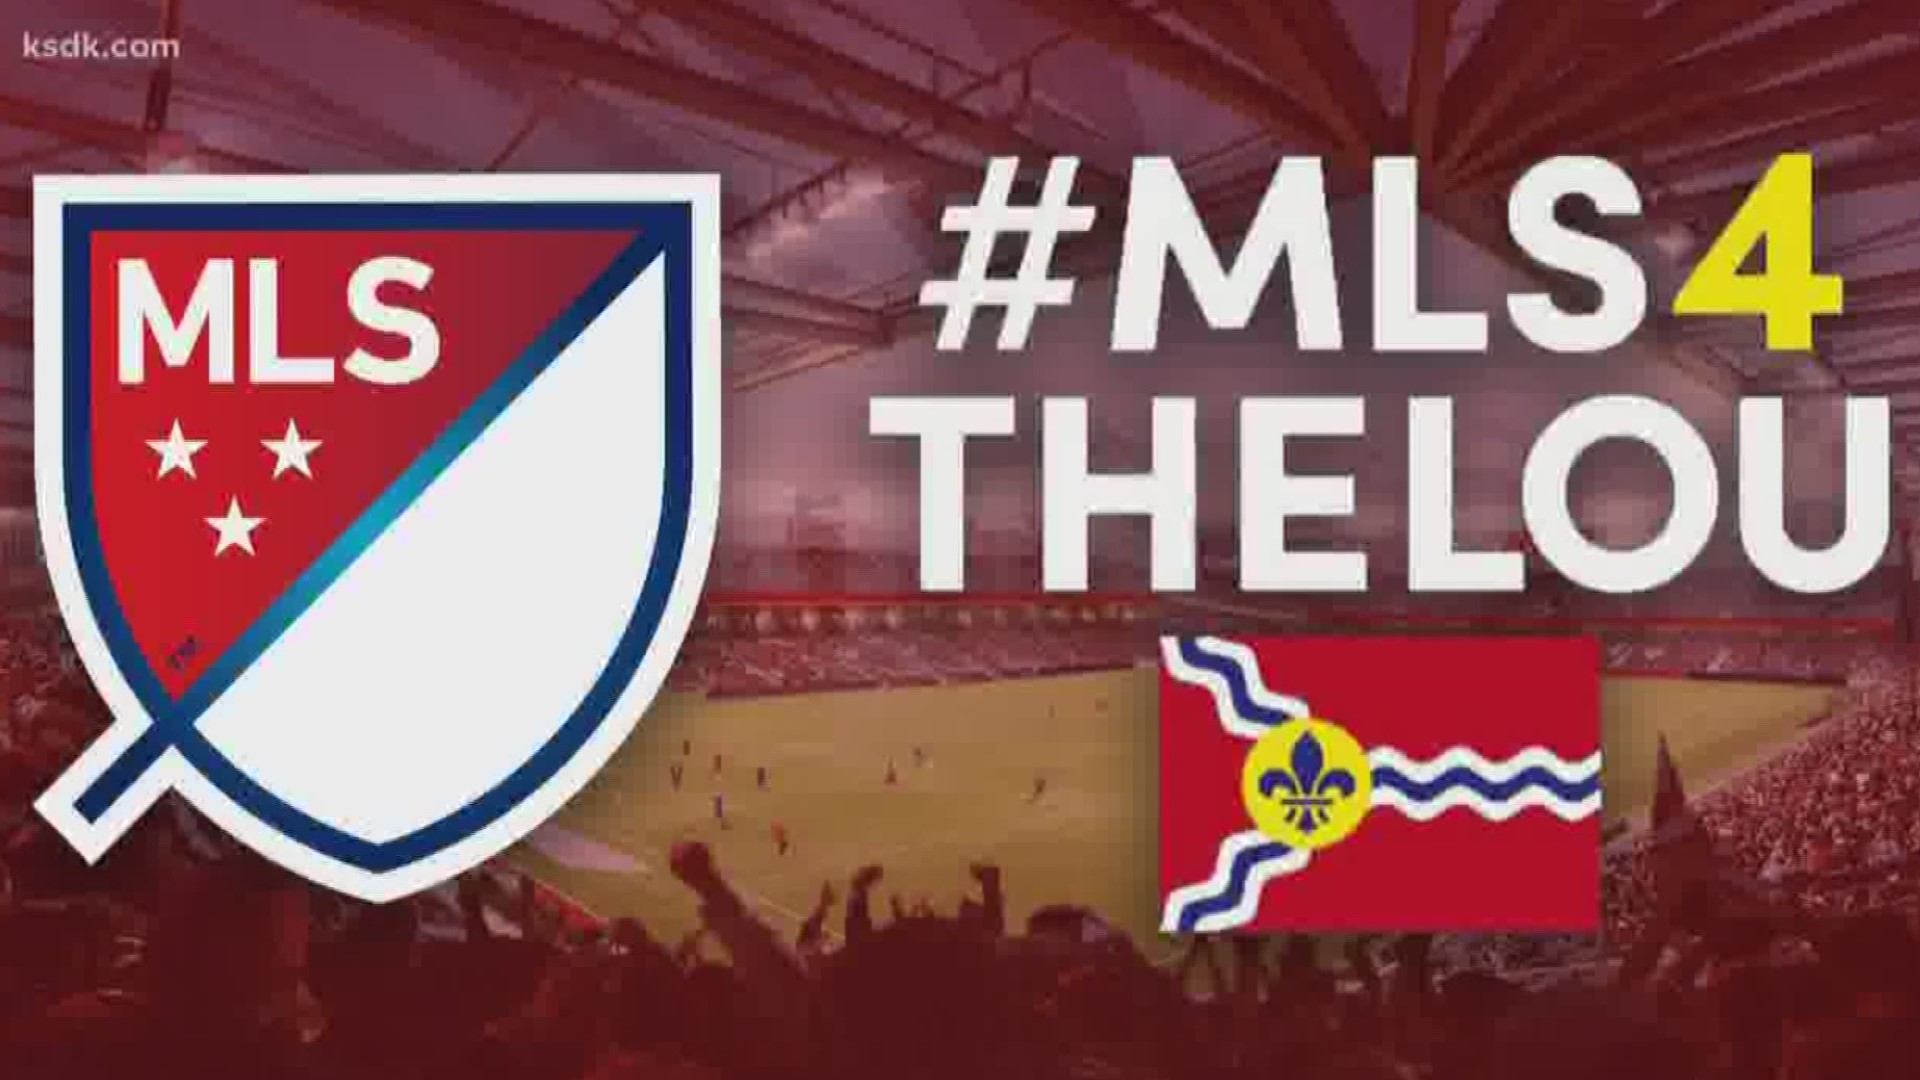 Major League Soccer will make an announcement that St. Louis will be chosen as an expansion team to begin in the 2022 season.